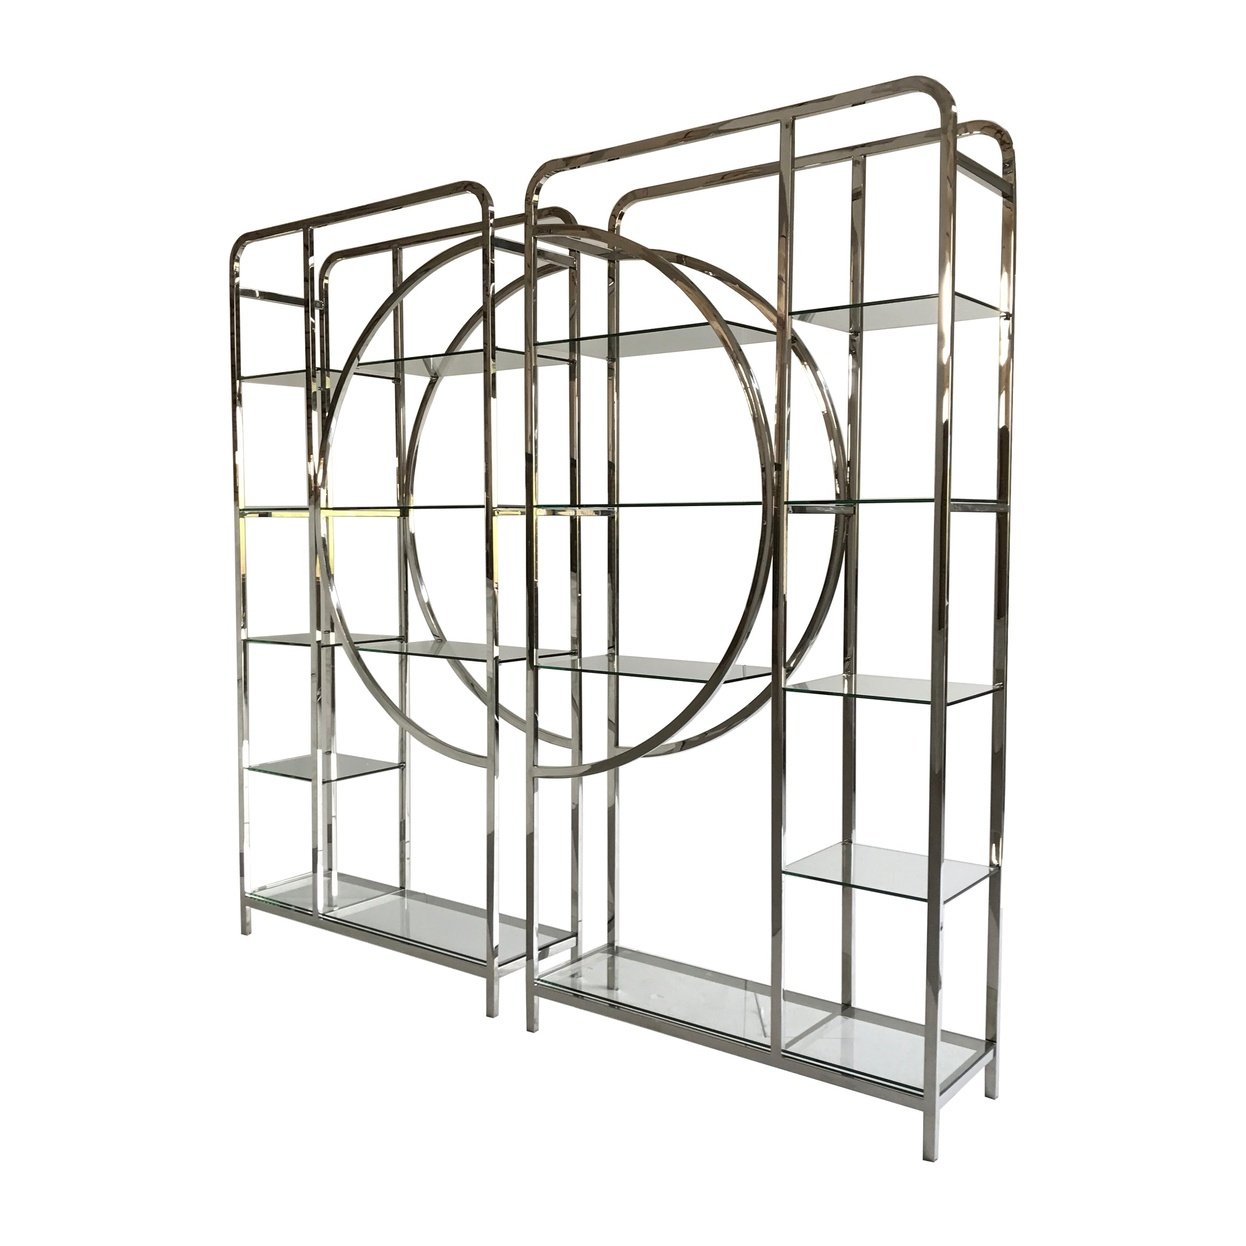 Set of 2 Gateby Stainless Steel  Shelving Unit